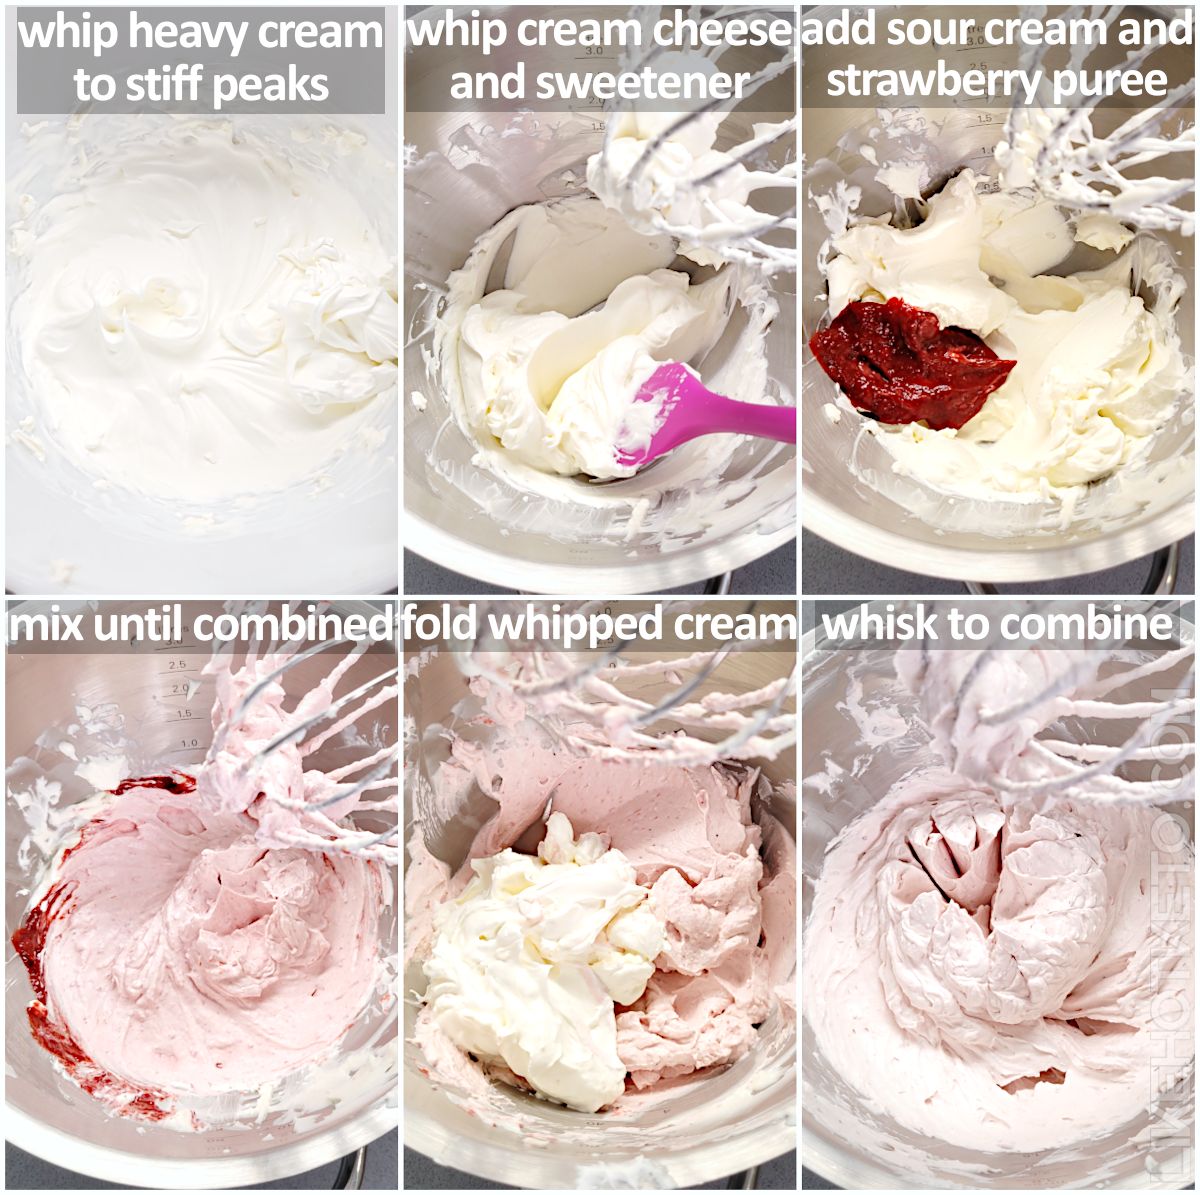 Steps of making the sugar-free strawberry cream cheese frosting.